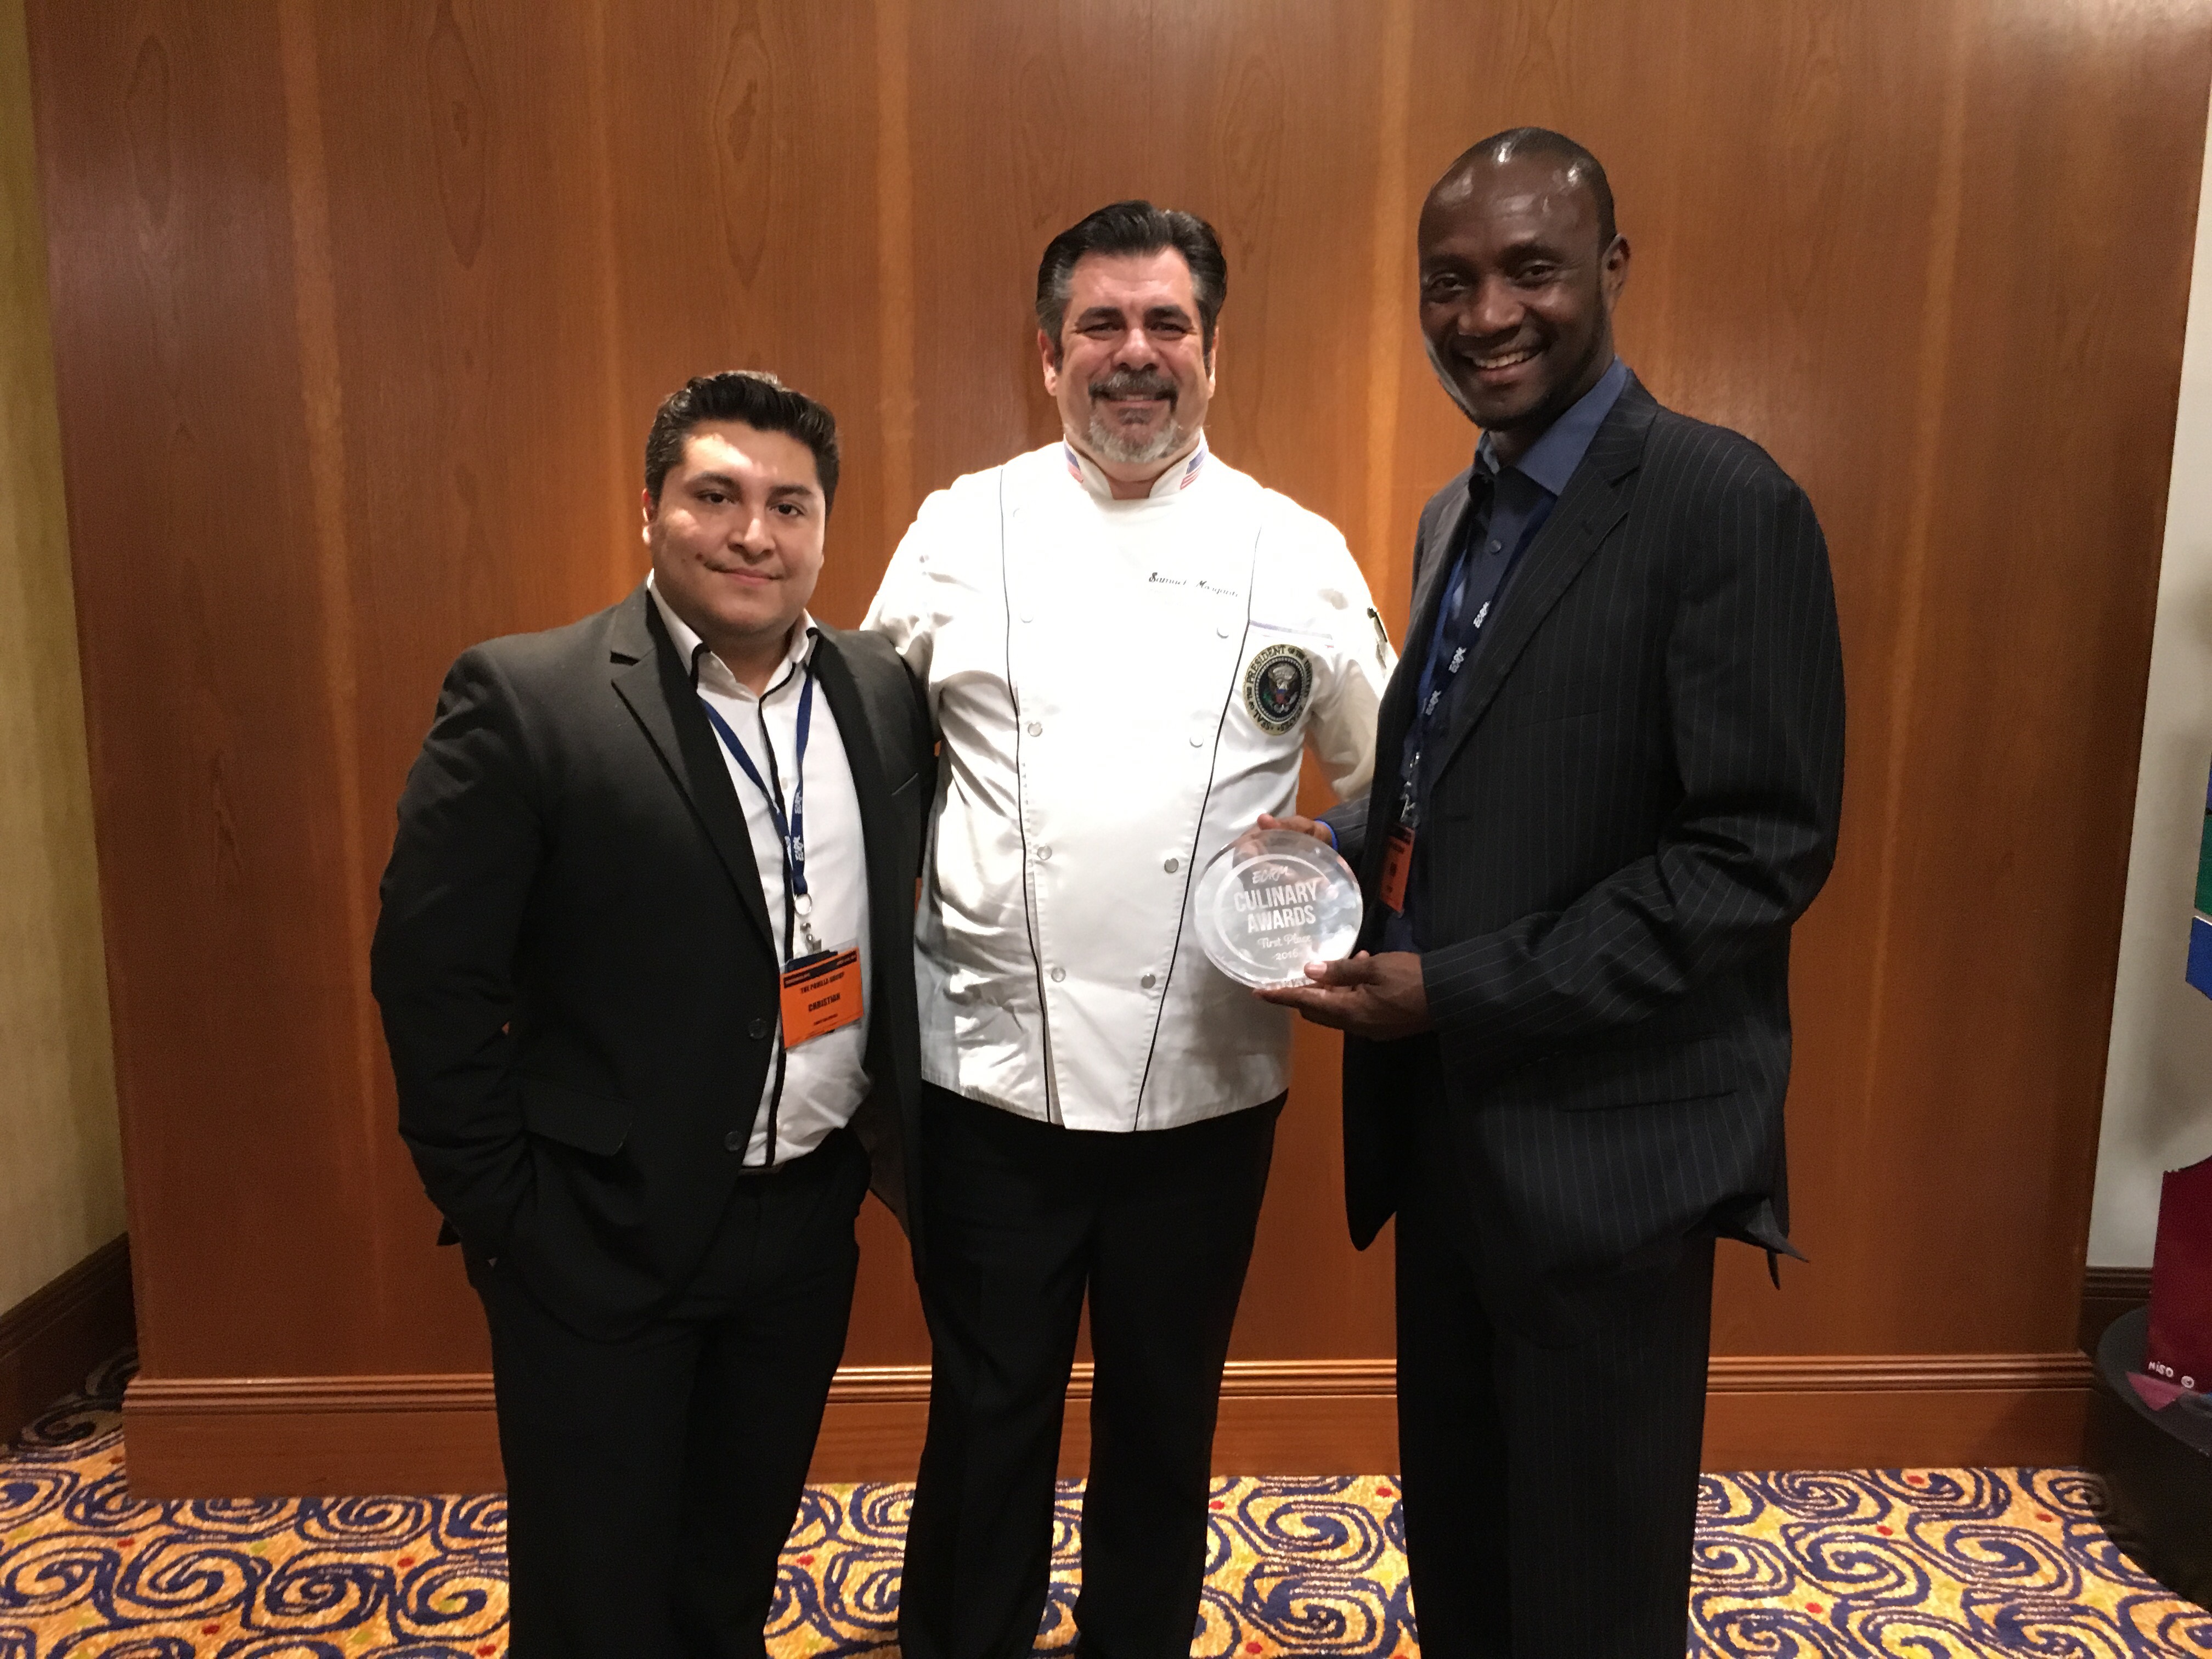 From left: Christian Colula and Ben Uba of First Place winner, The Padilla Group, with Chef Sam Morgante